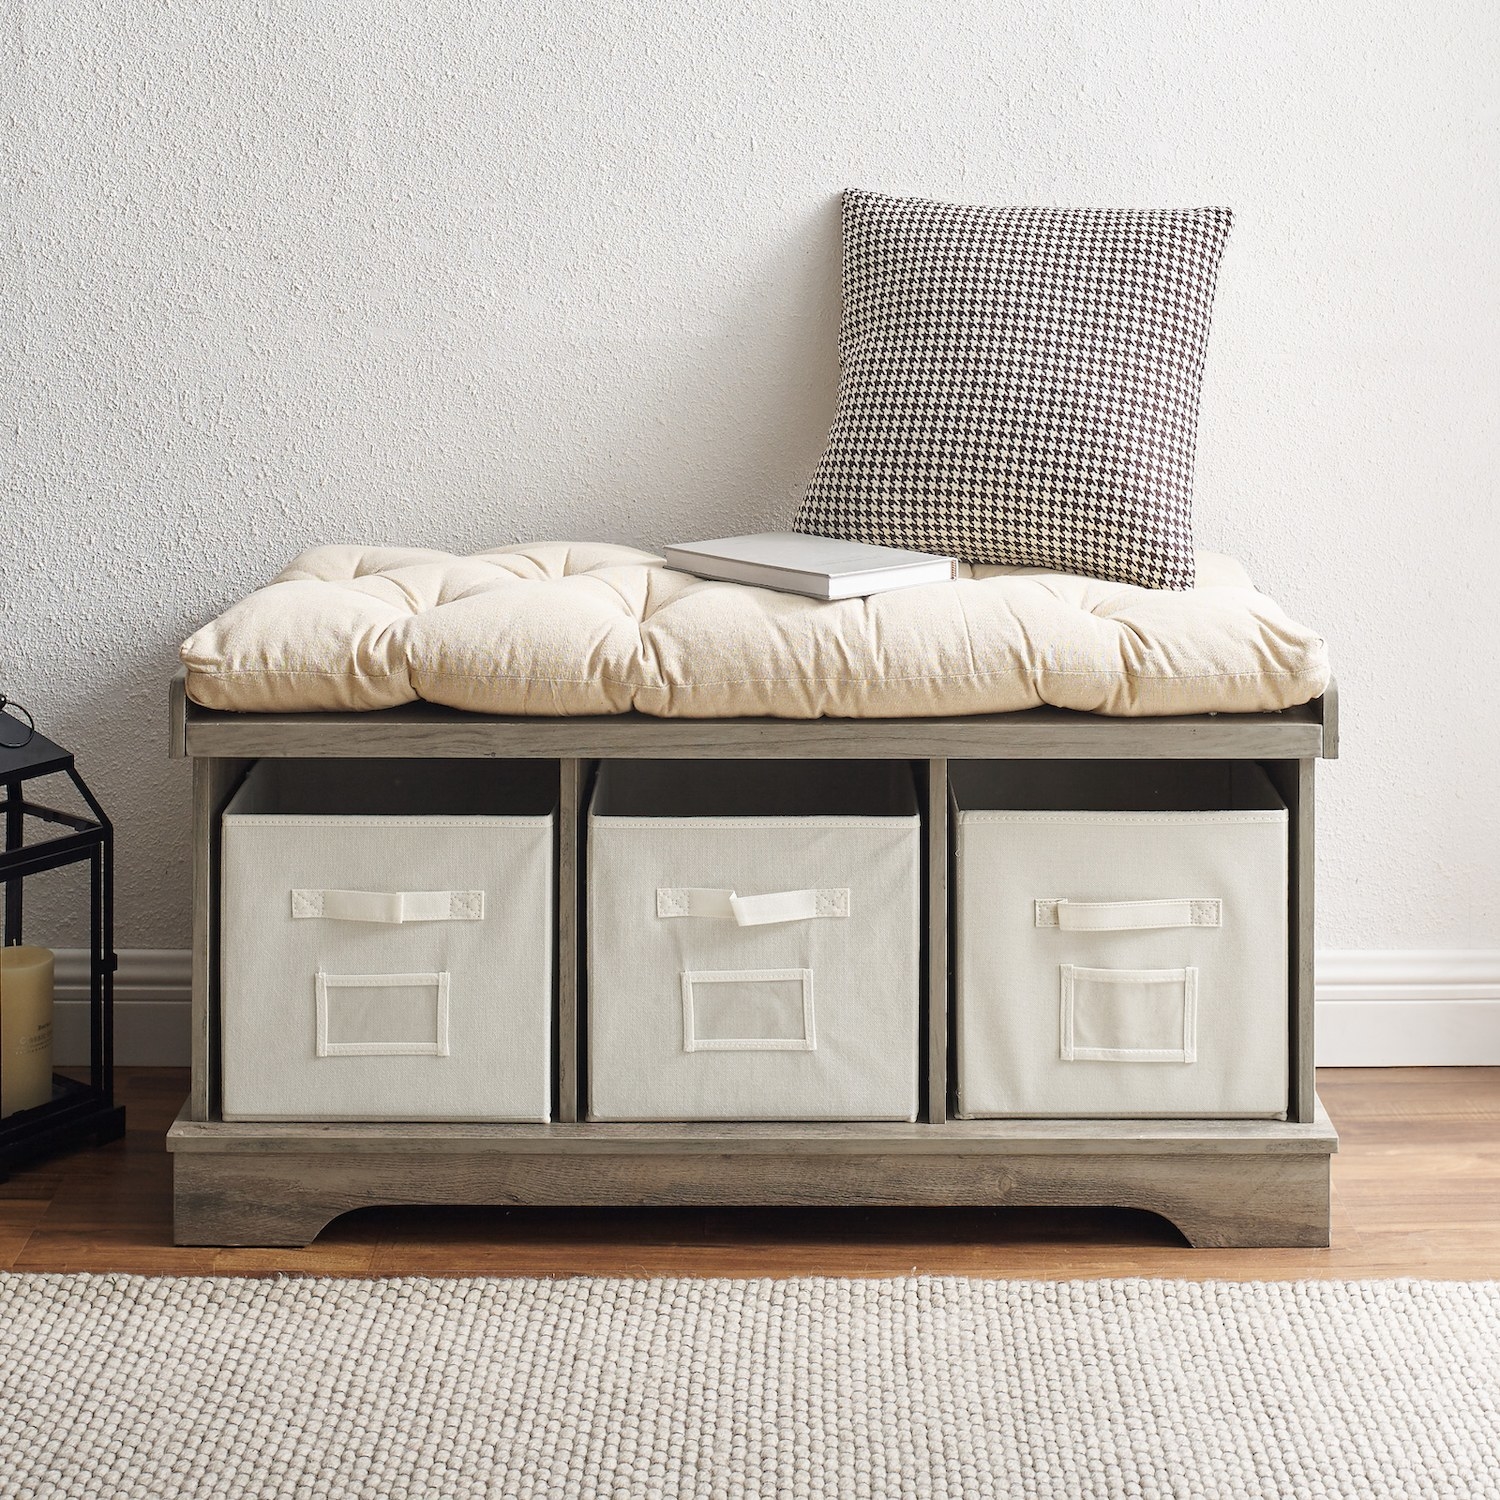 The storage bench with a tufted ivory cushion on top and three matching storage bins underneath